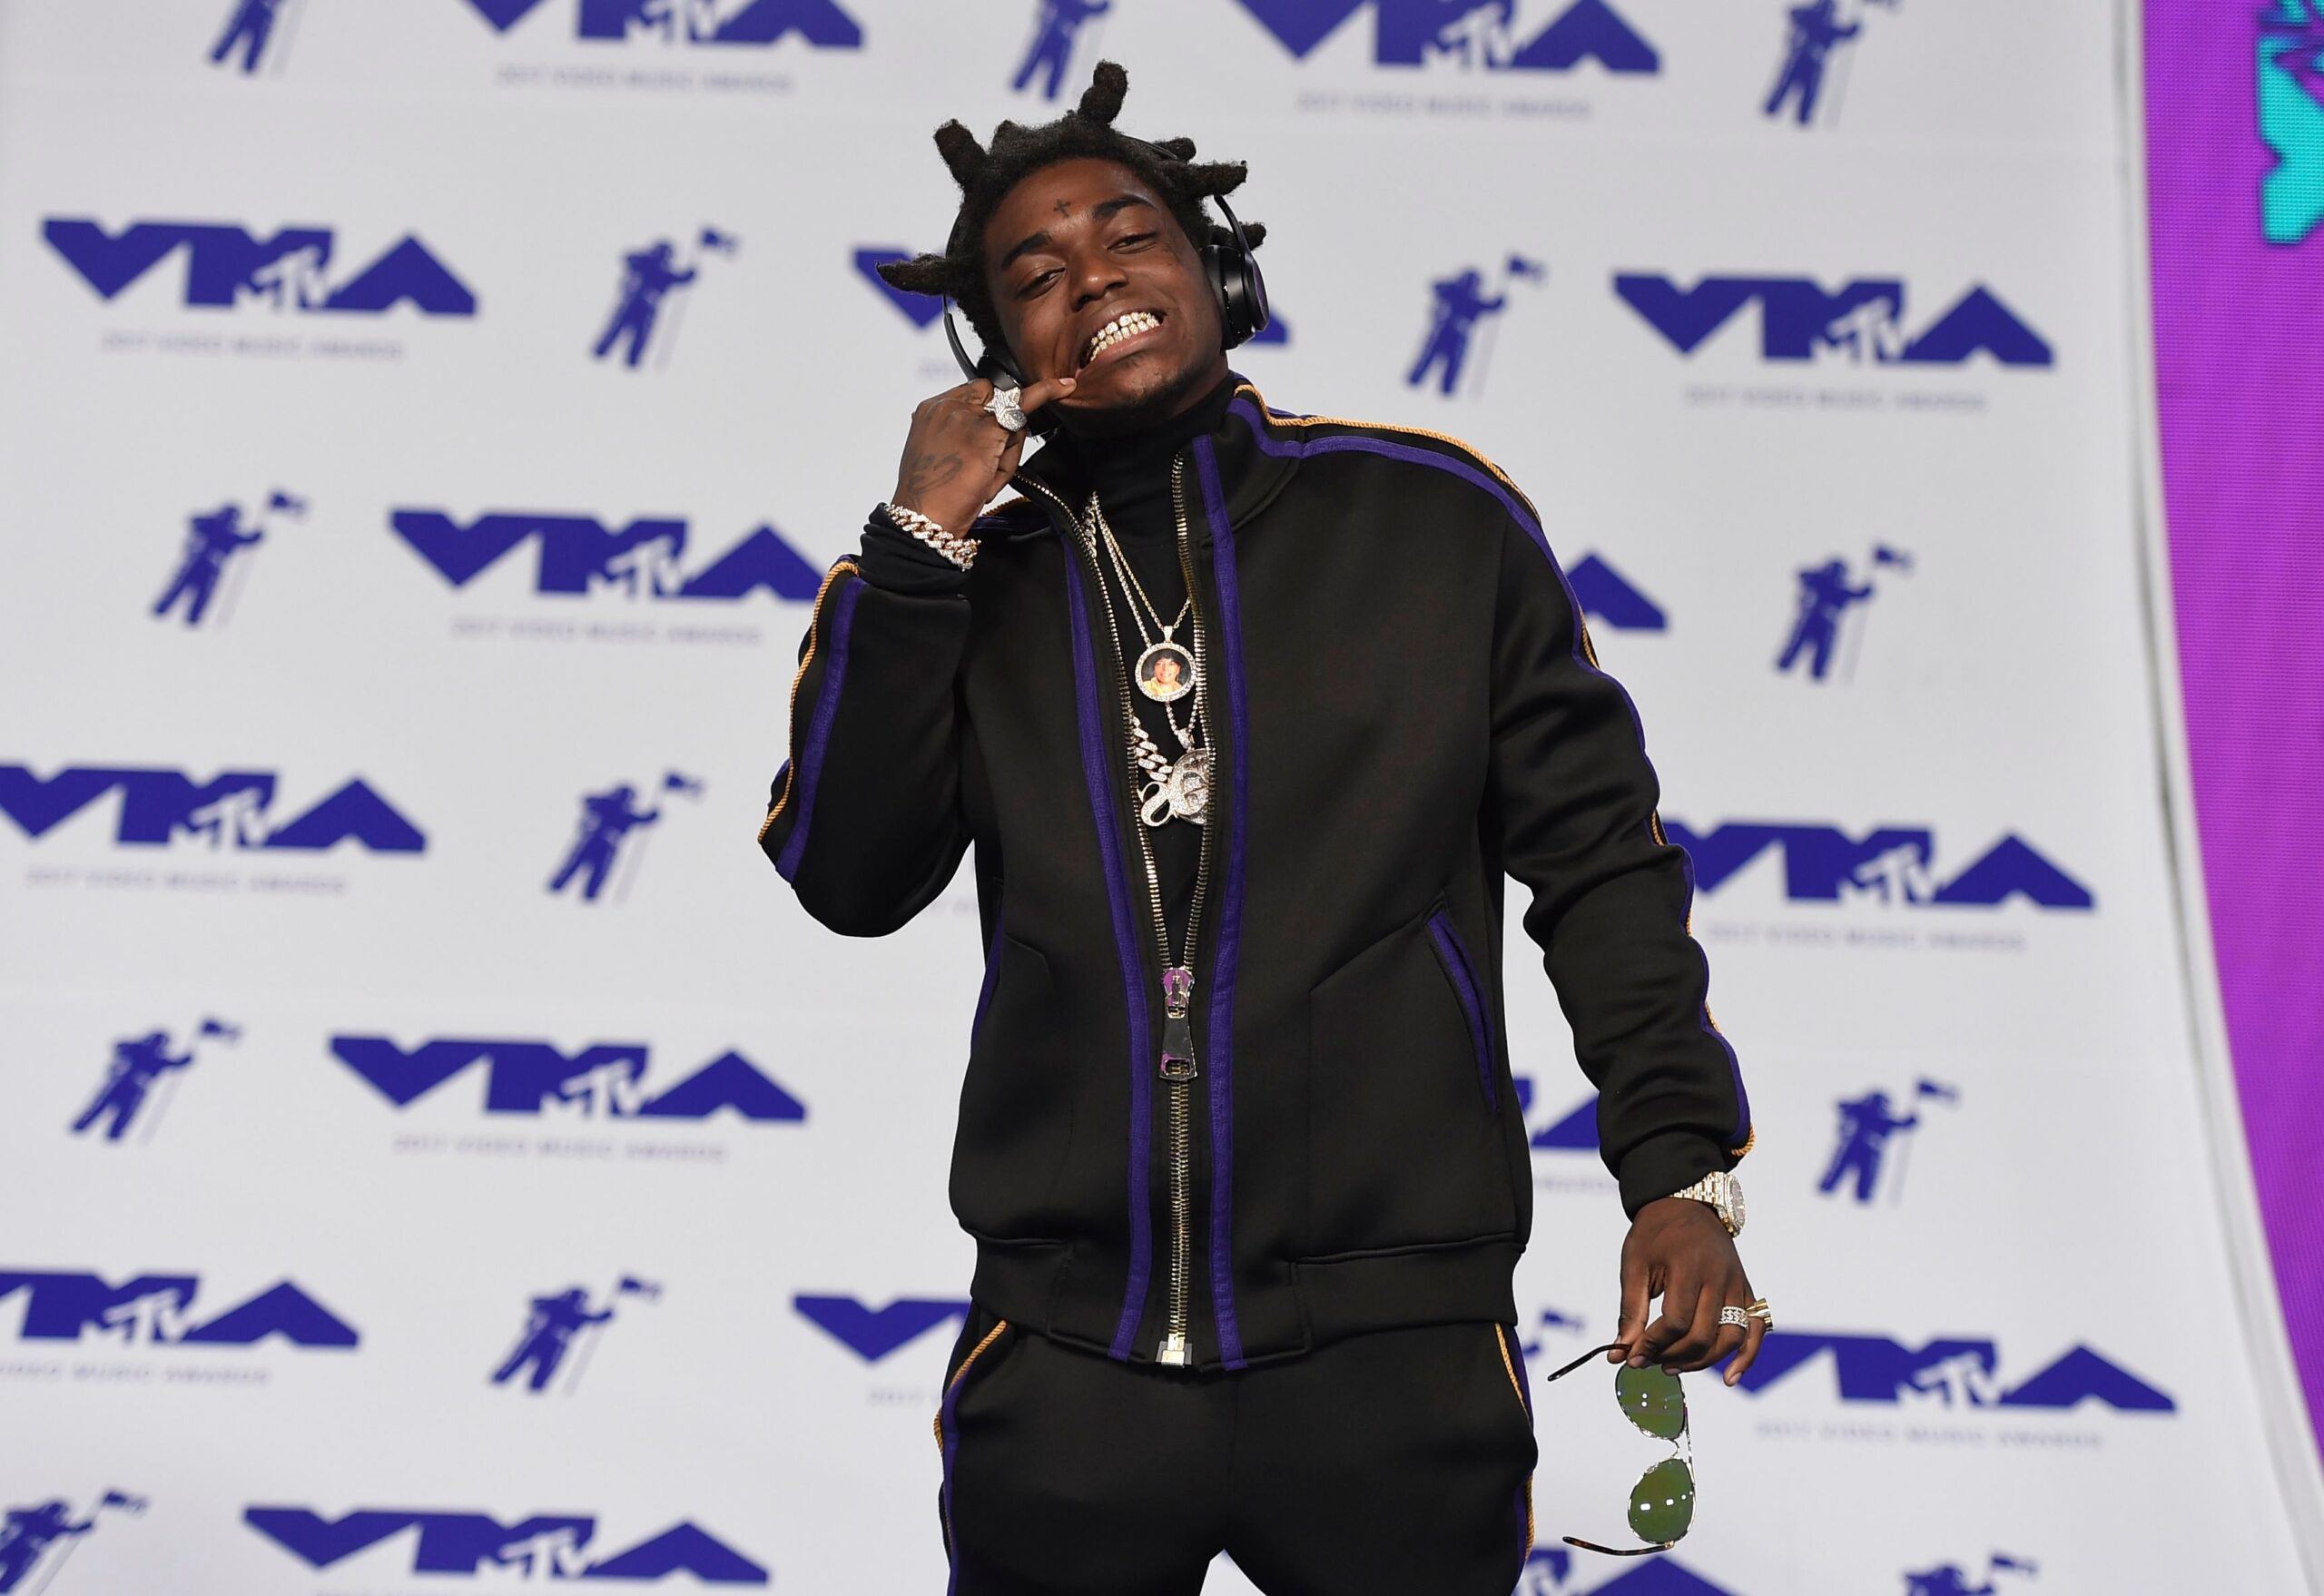 KODAK BLACK Claims Police are “racially profiling” him after the most recent arrest of “IMA SUE.”